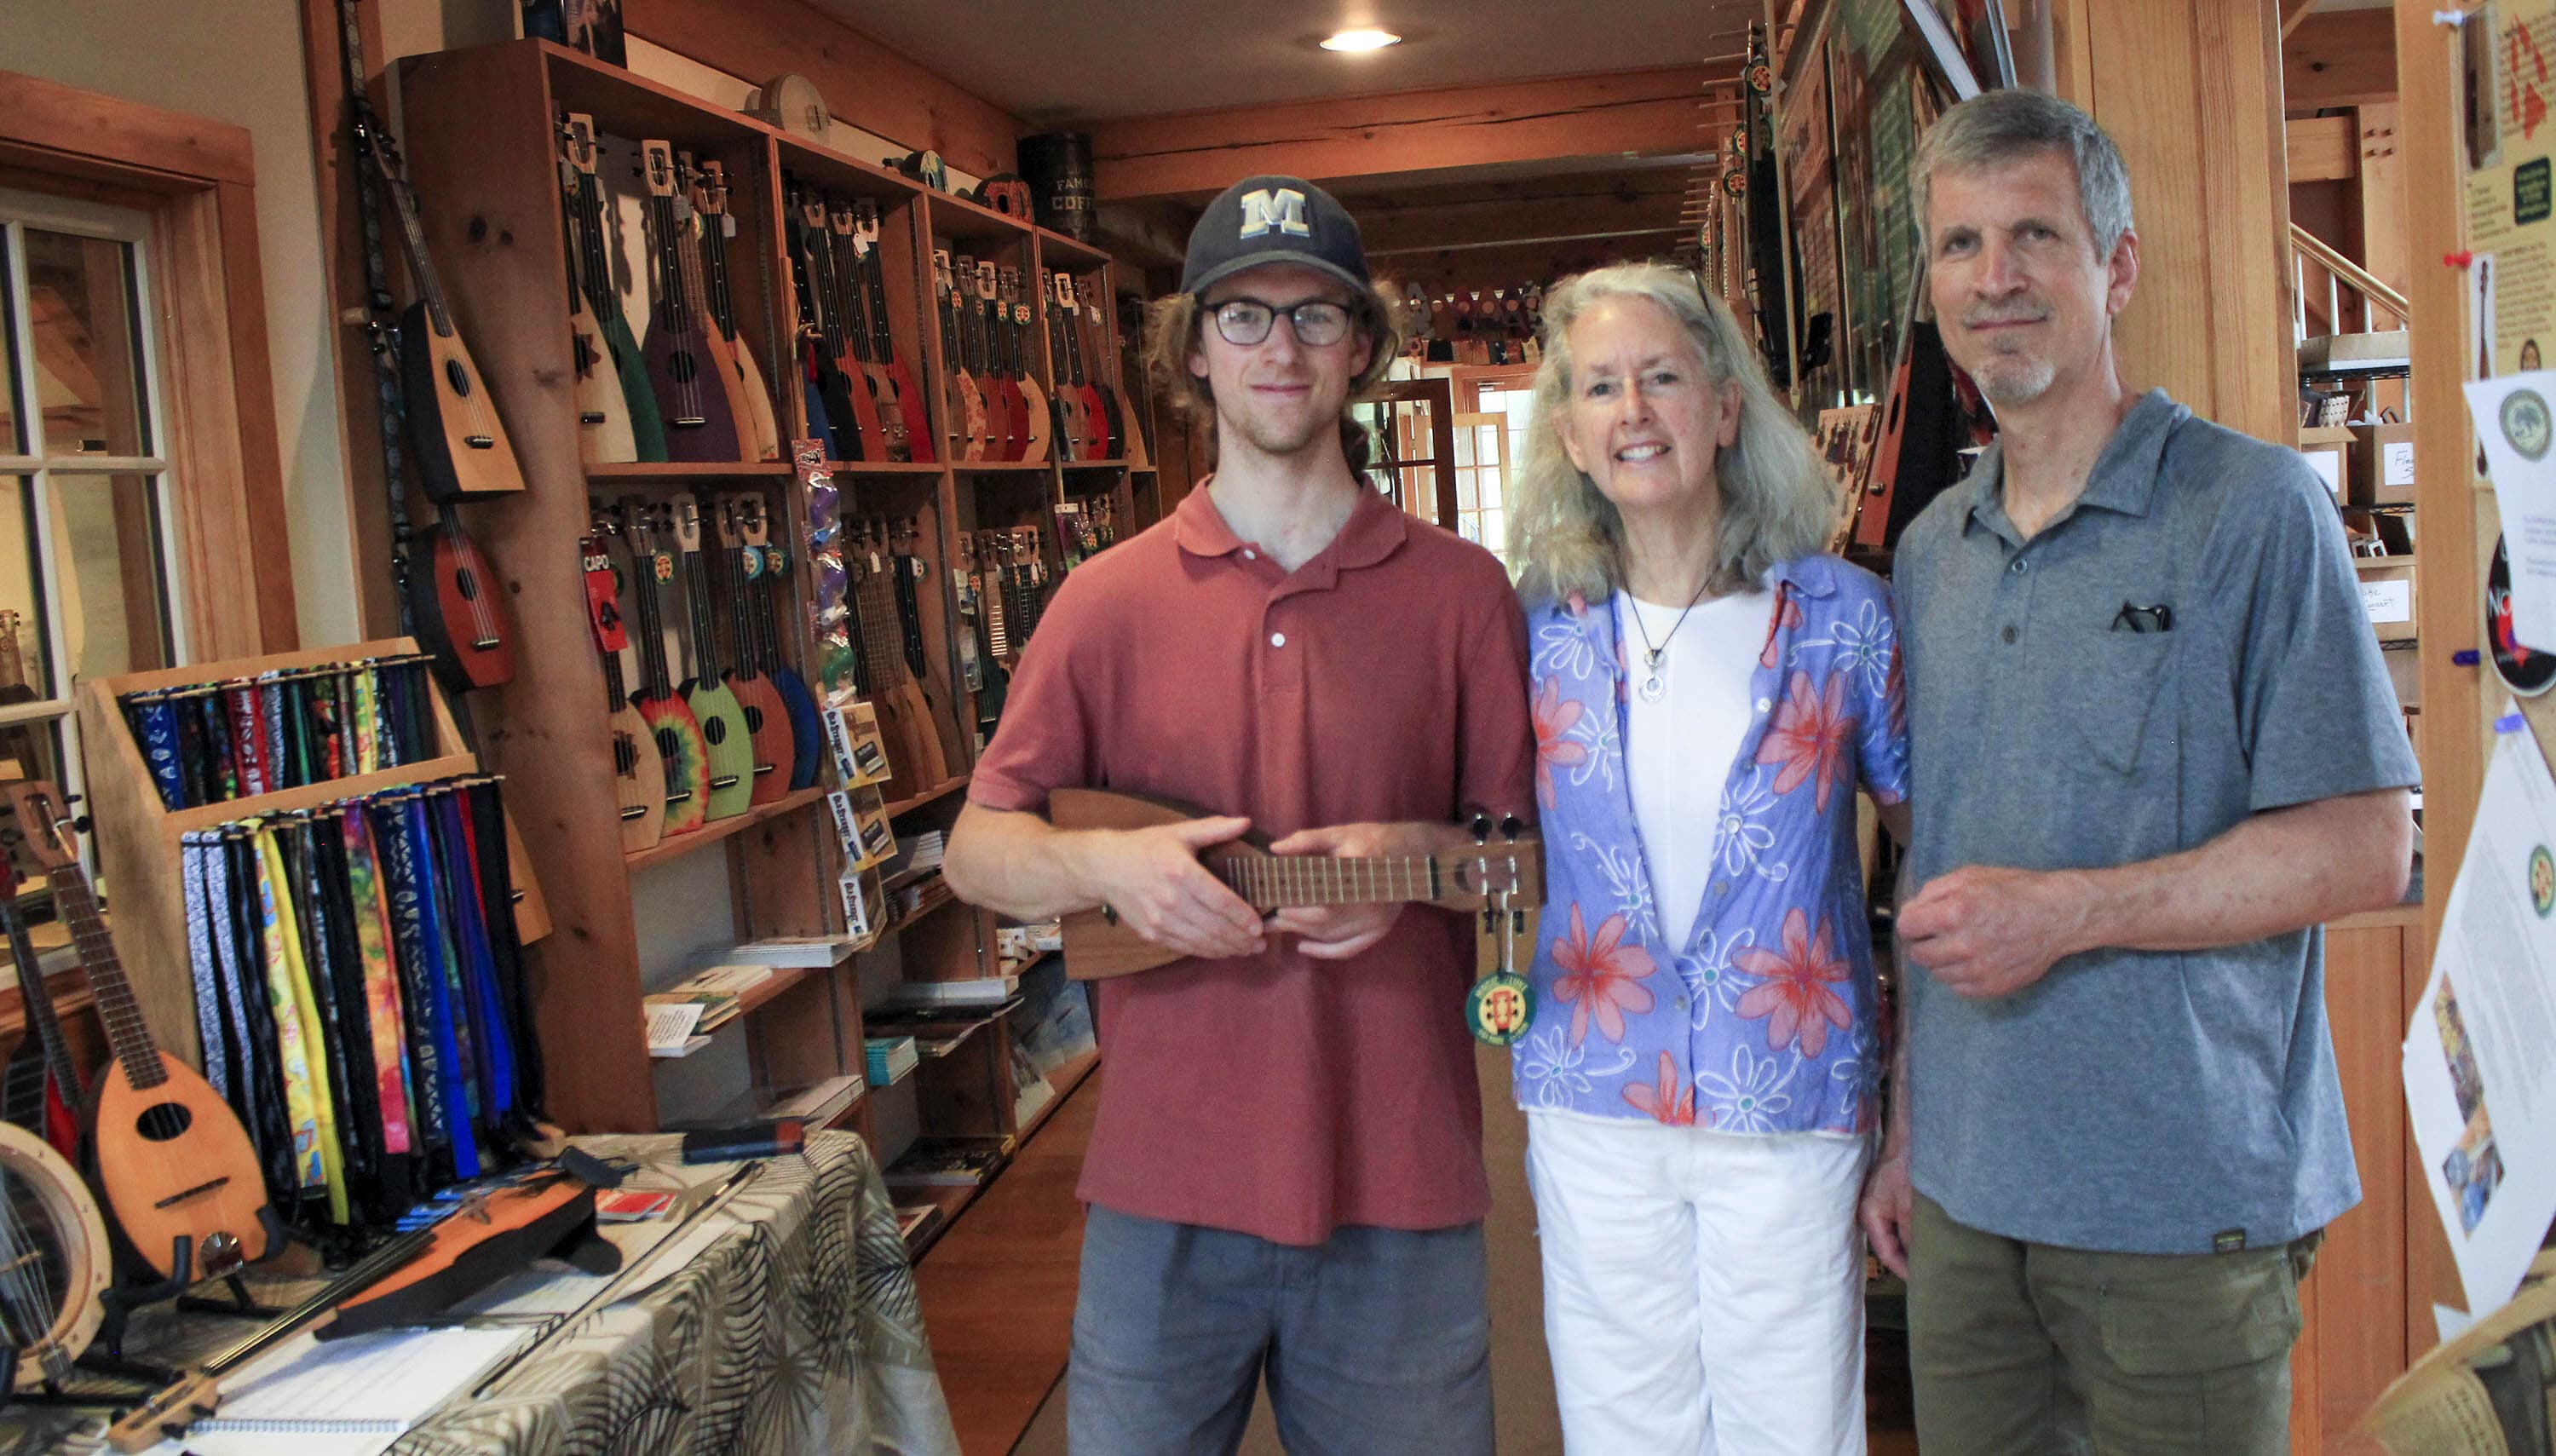 Josh, Phyllis, and Dale Webb stand in their store, The Magic Fluke, which sells handmade string instruments (Yasmin Amer / WBUR)